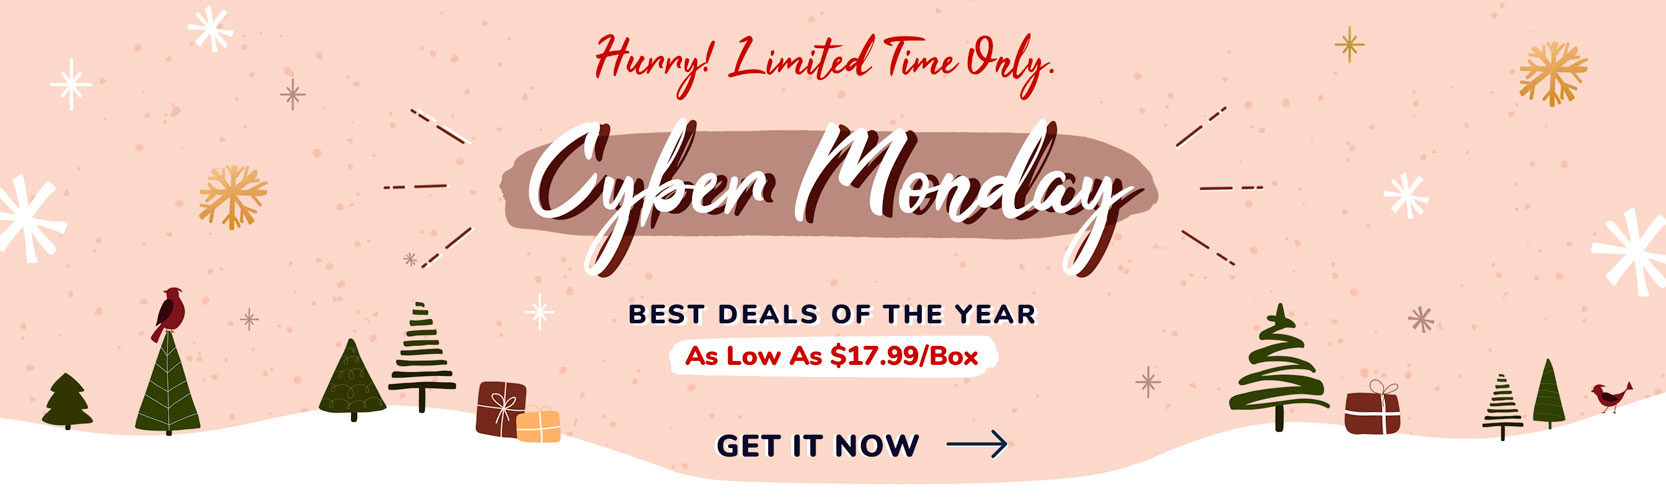 Day 11 of 12 Days of Sales: Cyber Sunday!